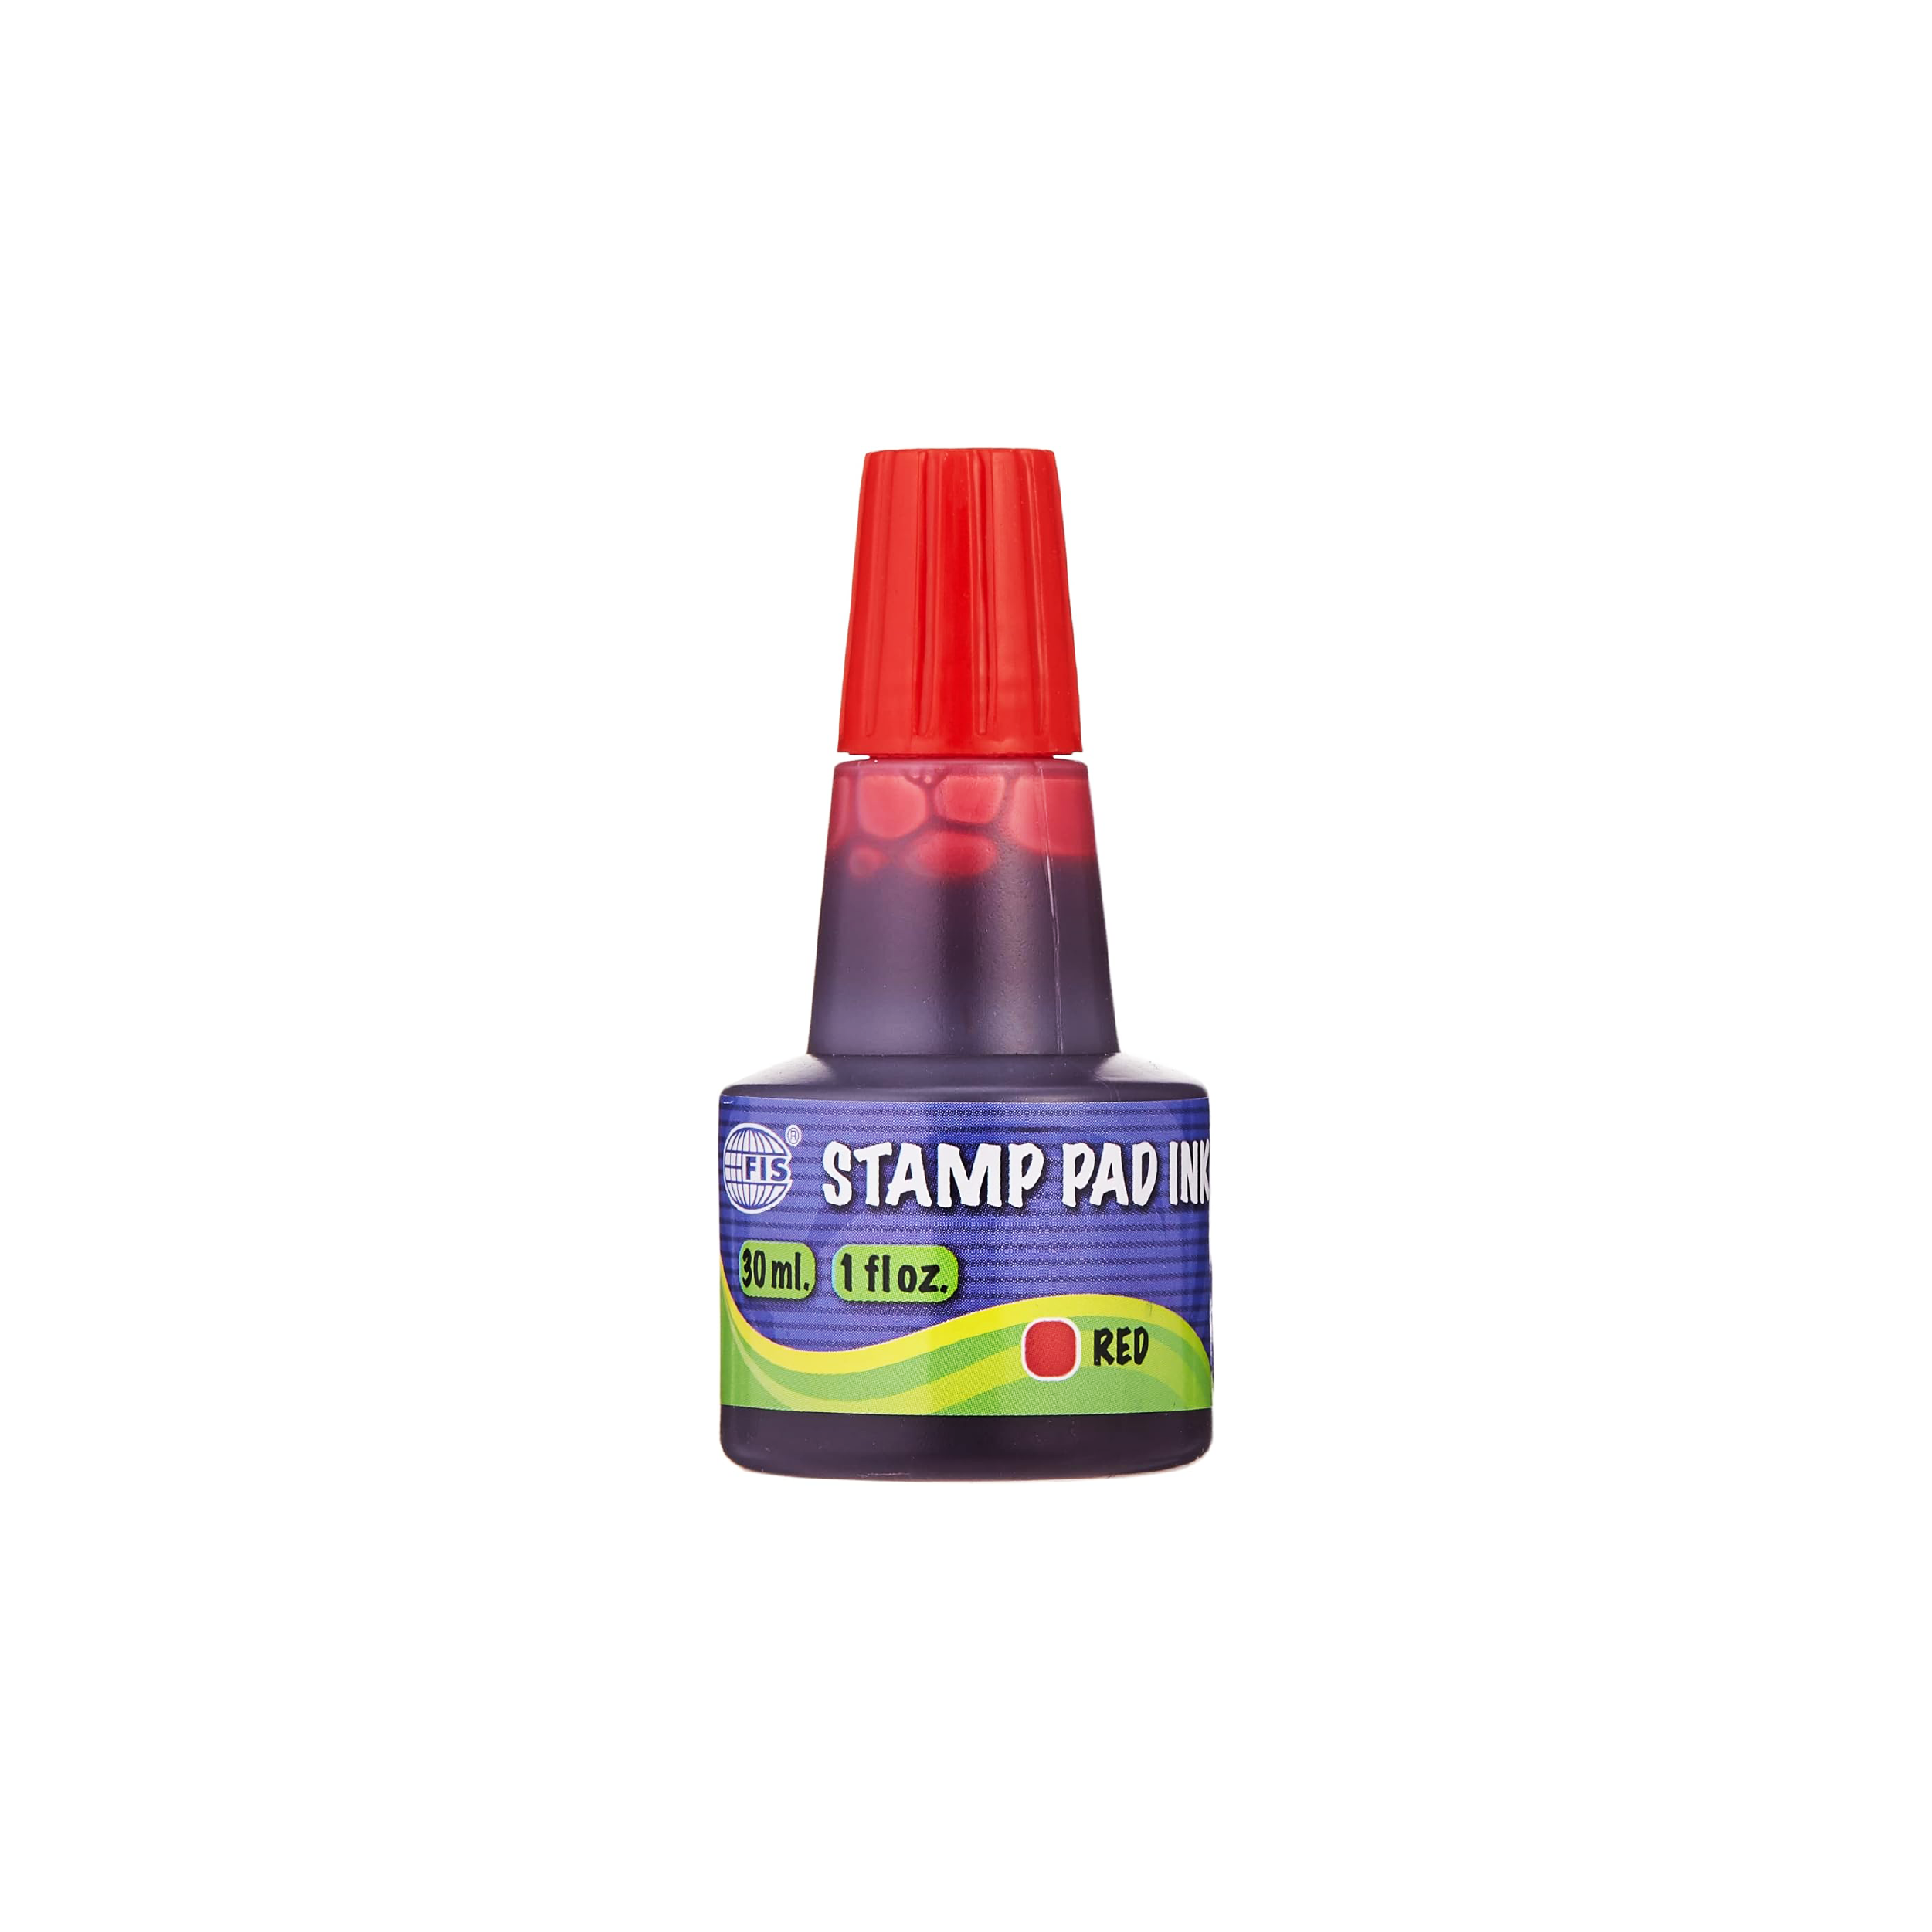 FIS Stamp Pad Ink, 30ml, Red (FSIK030RE)